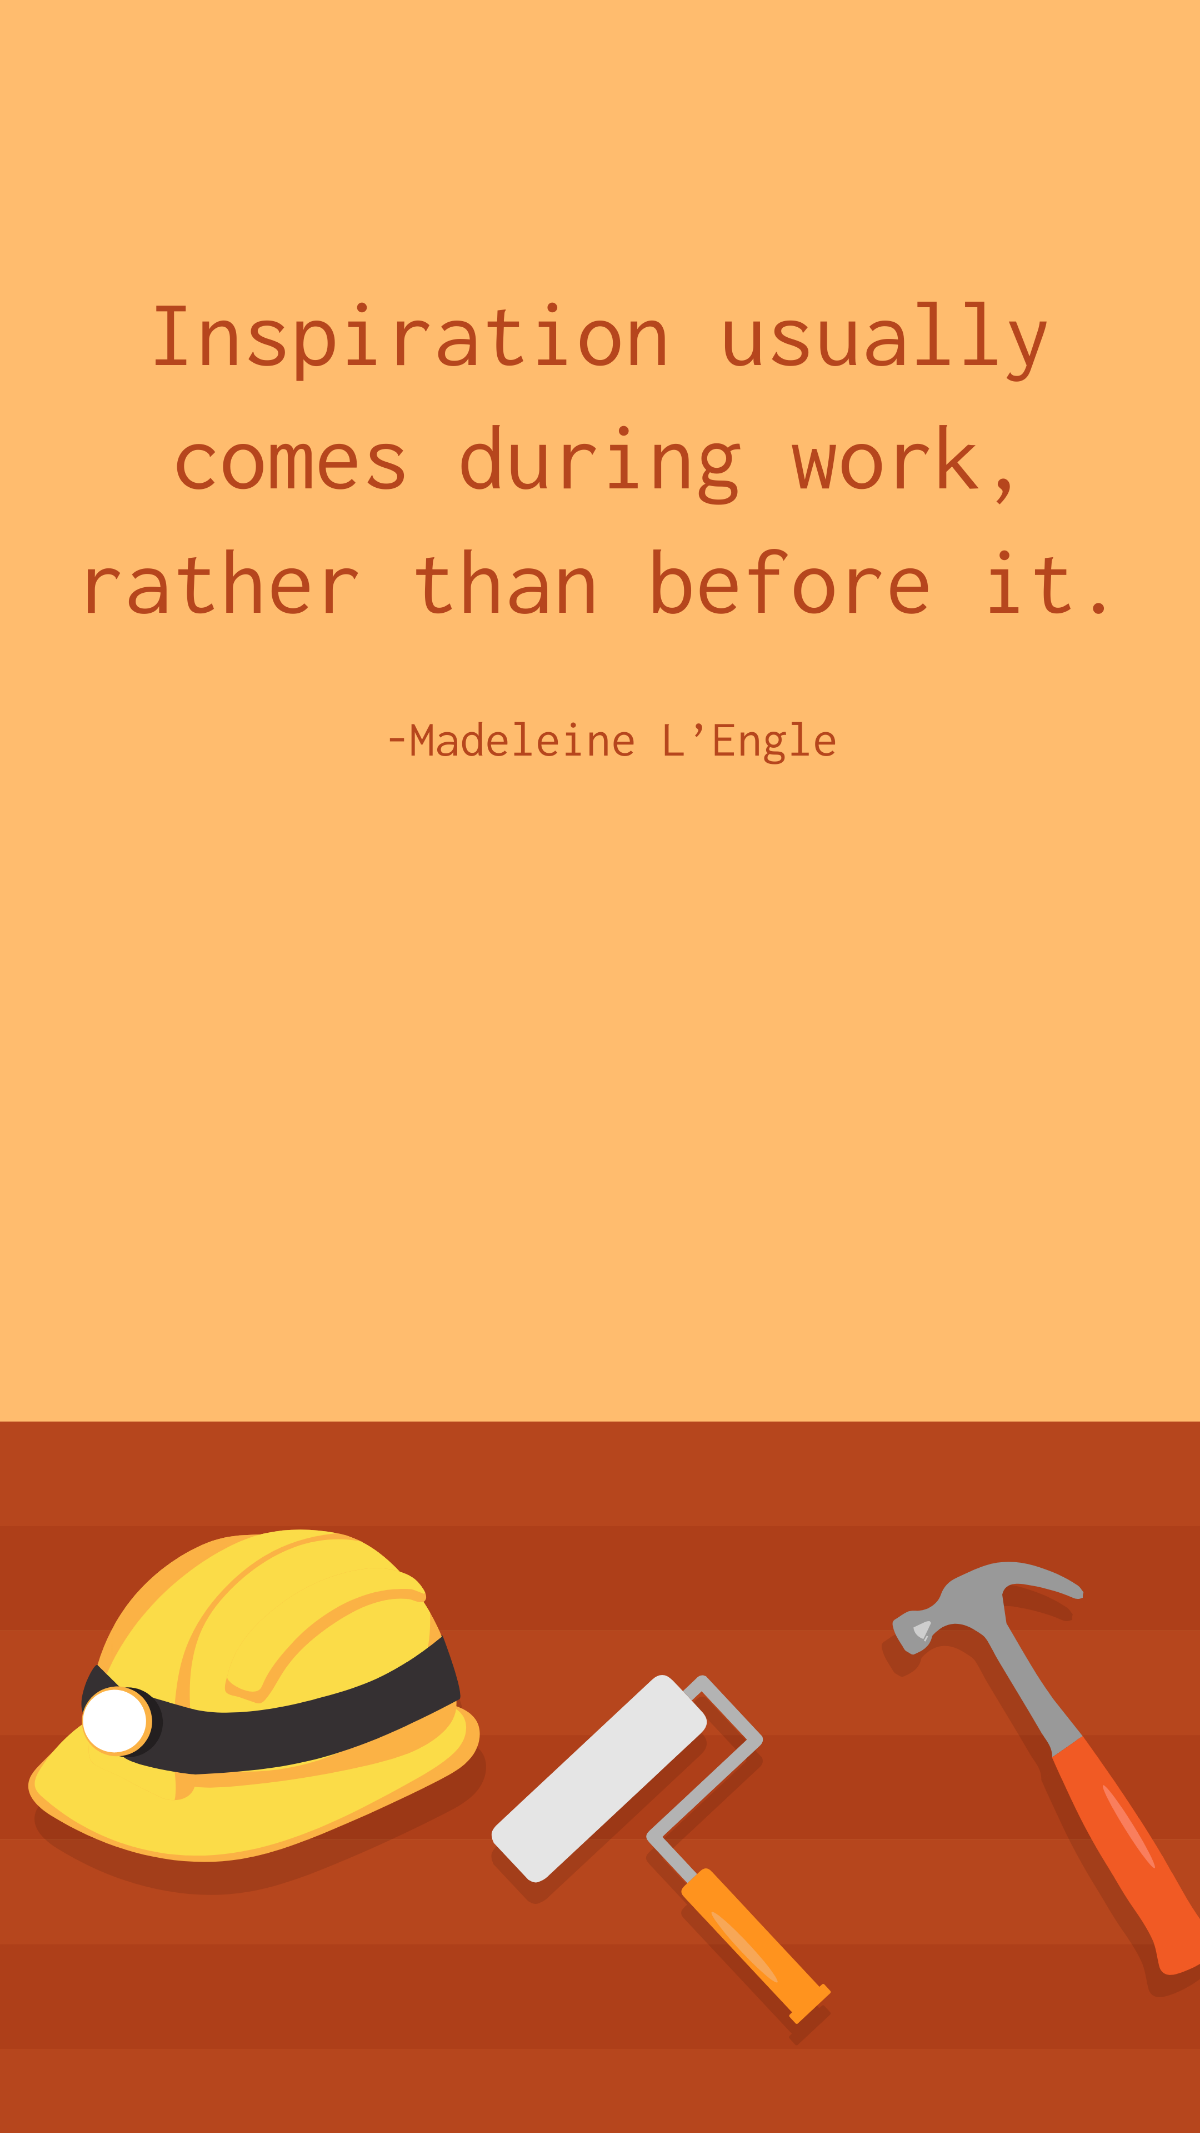 Madeleine L’Engle - Inspiration usually comes during work, rather than before it. Template